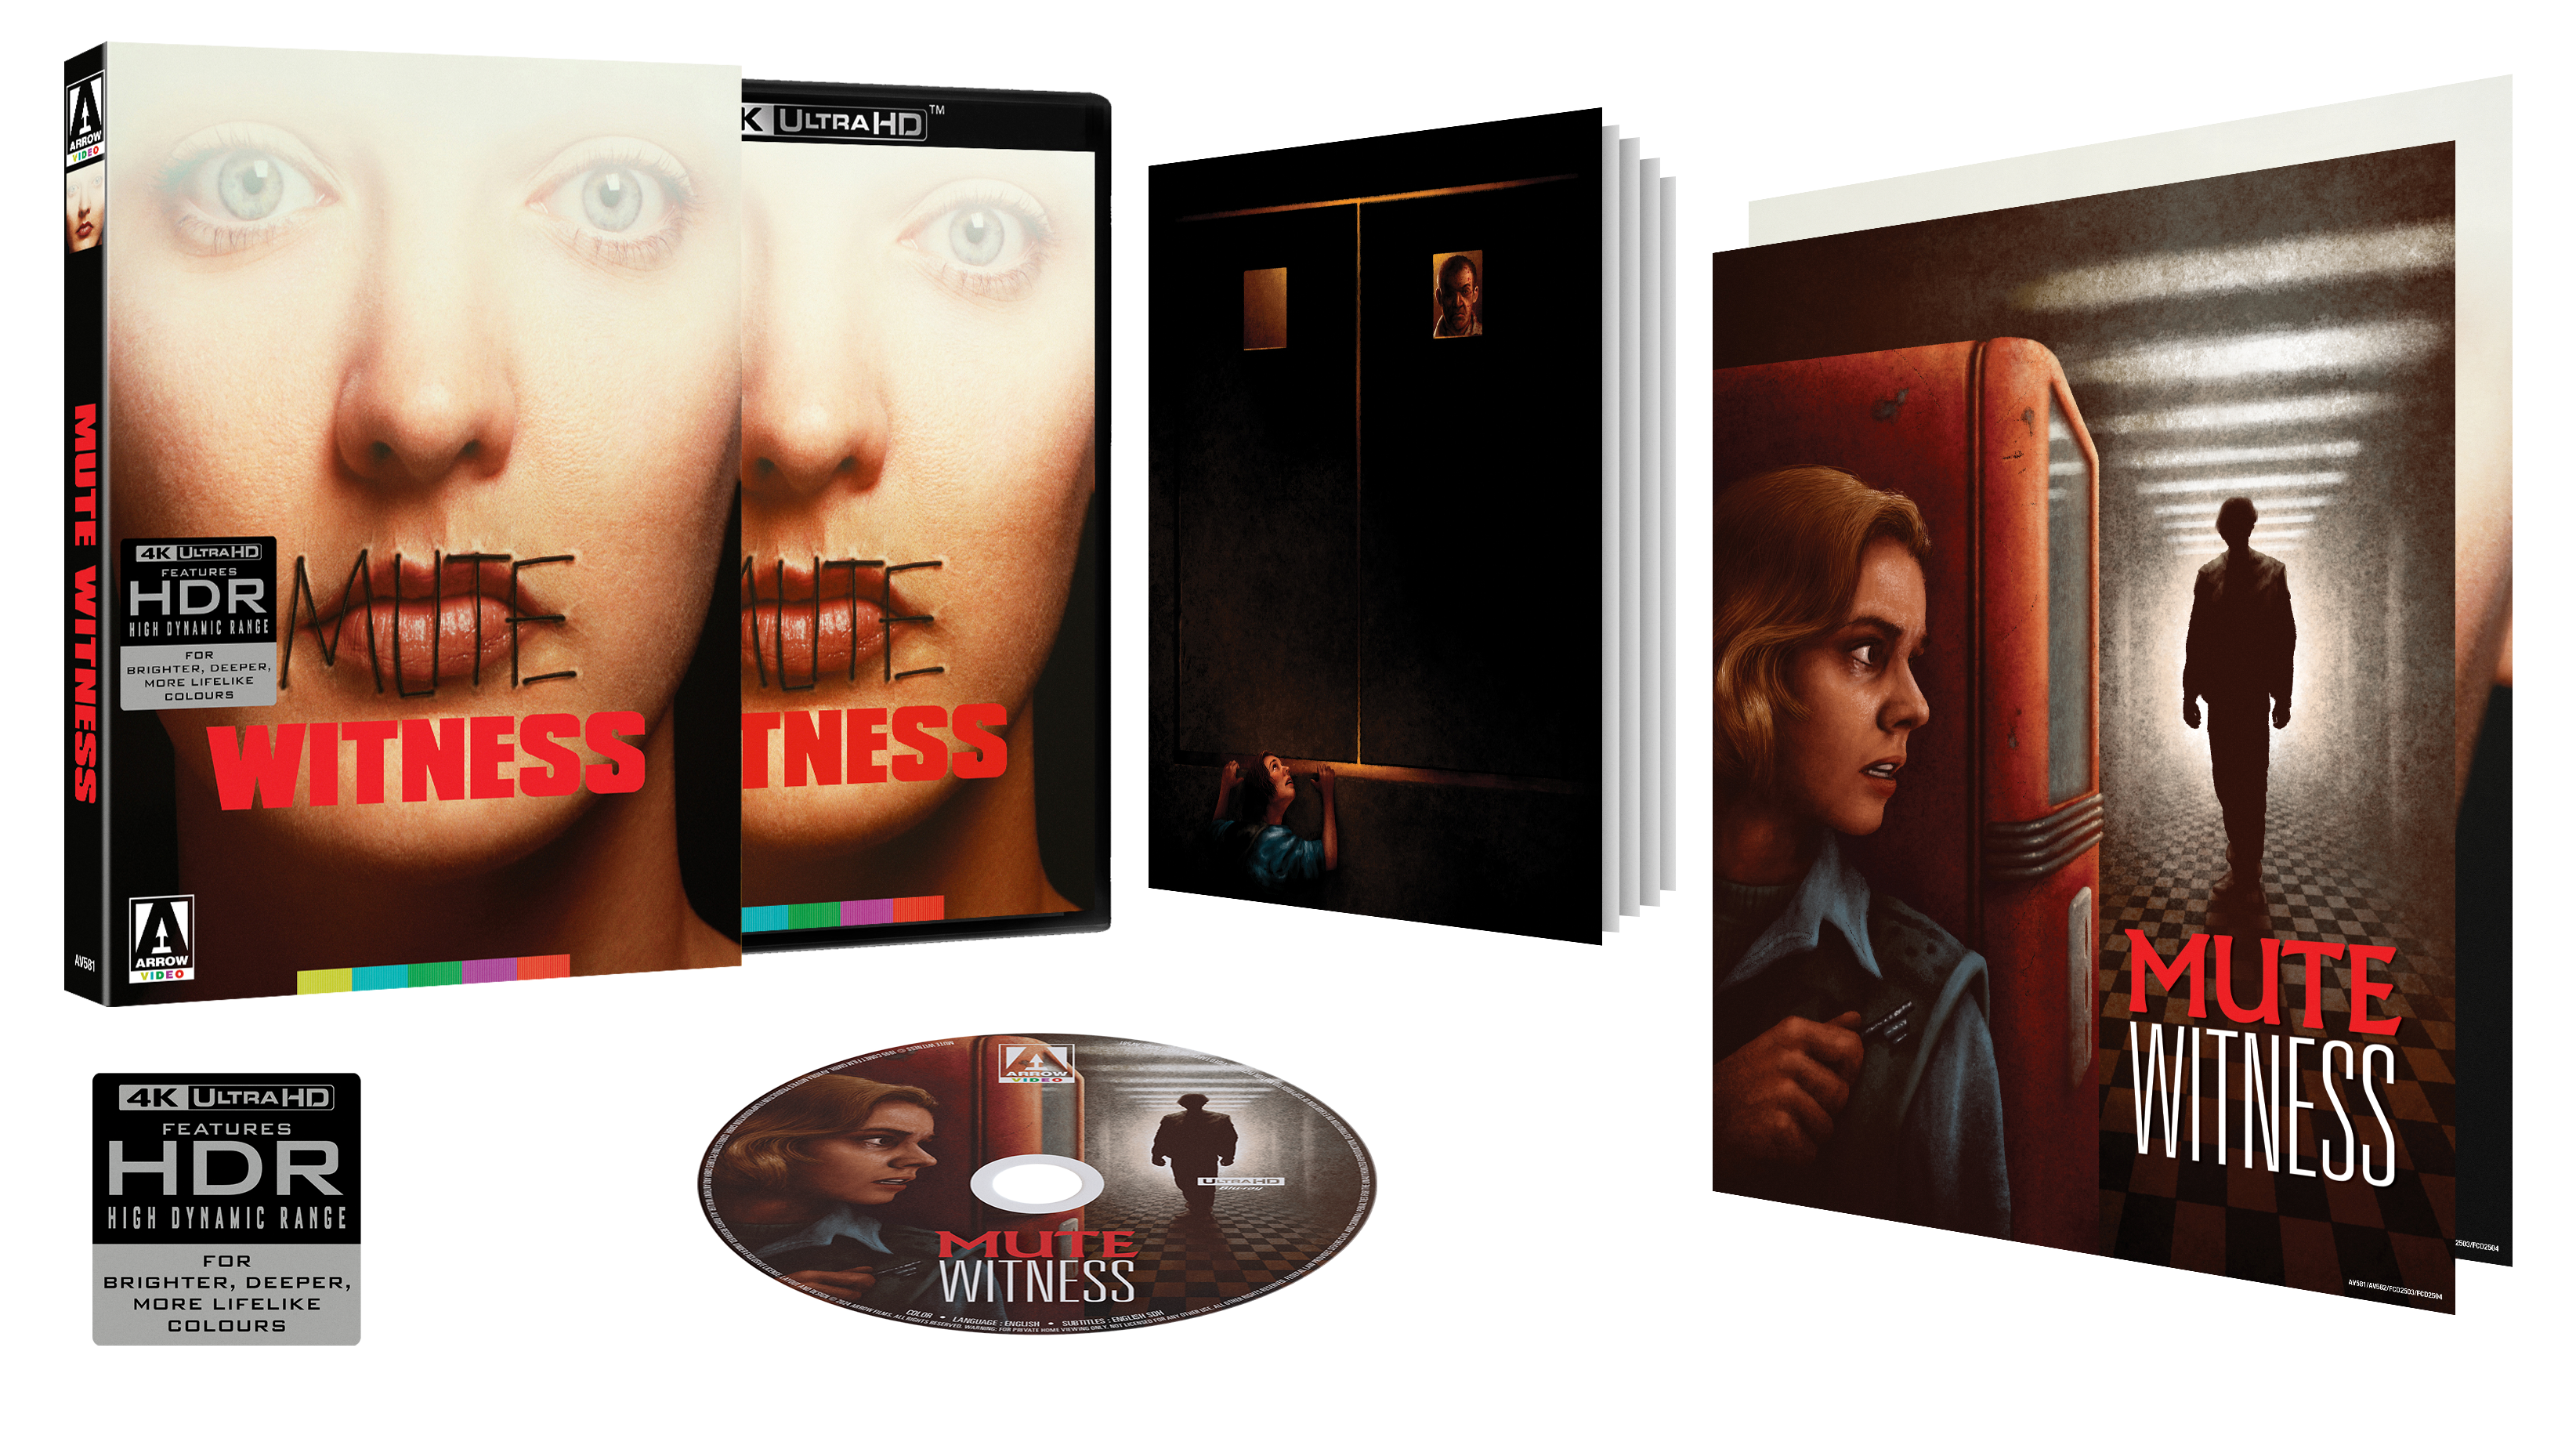 MUTE WITNESS (LIMITED EDITION) 4K UHD [PRE-ORDER]